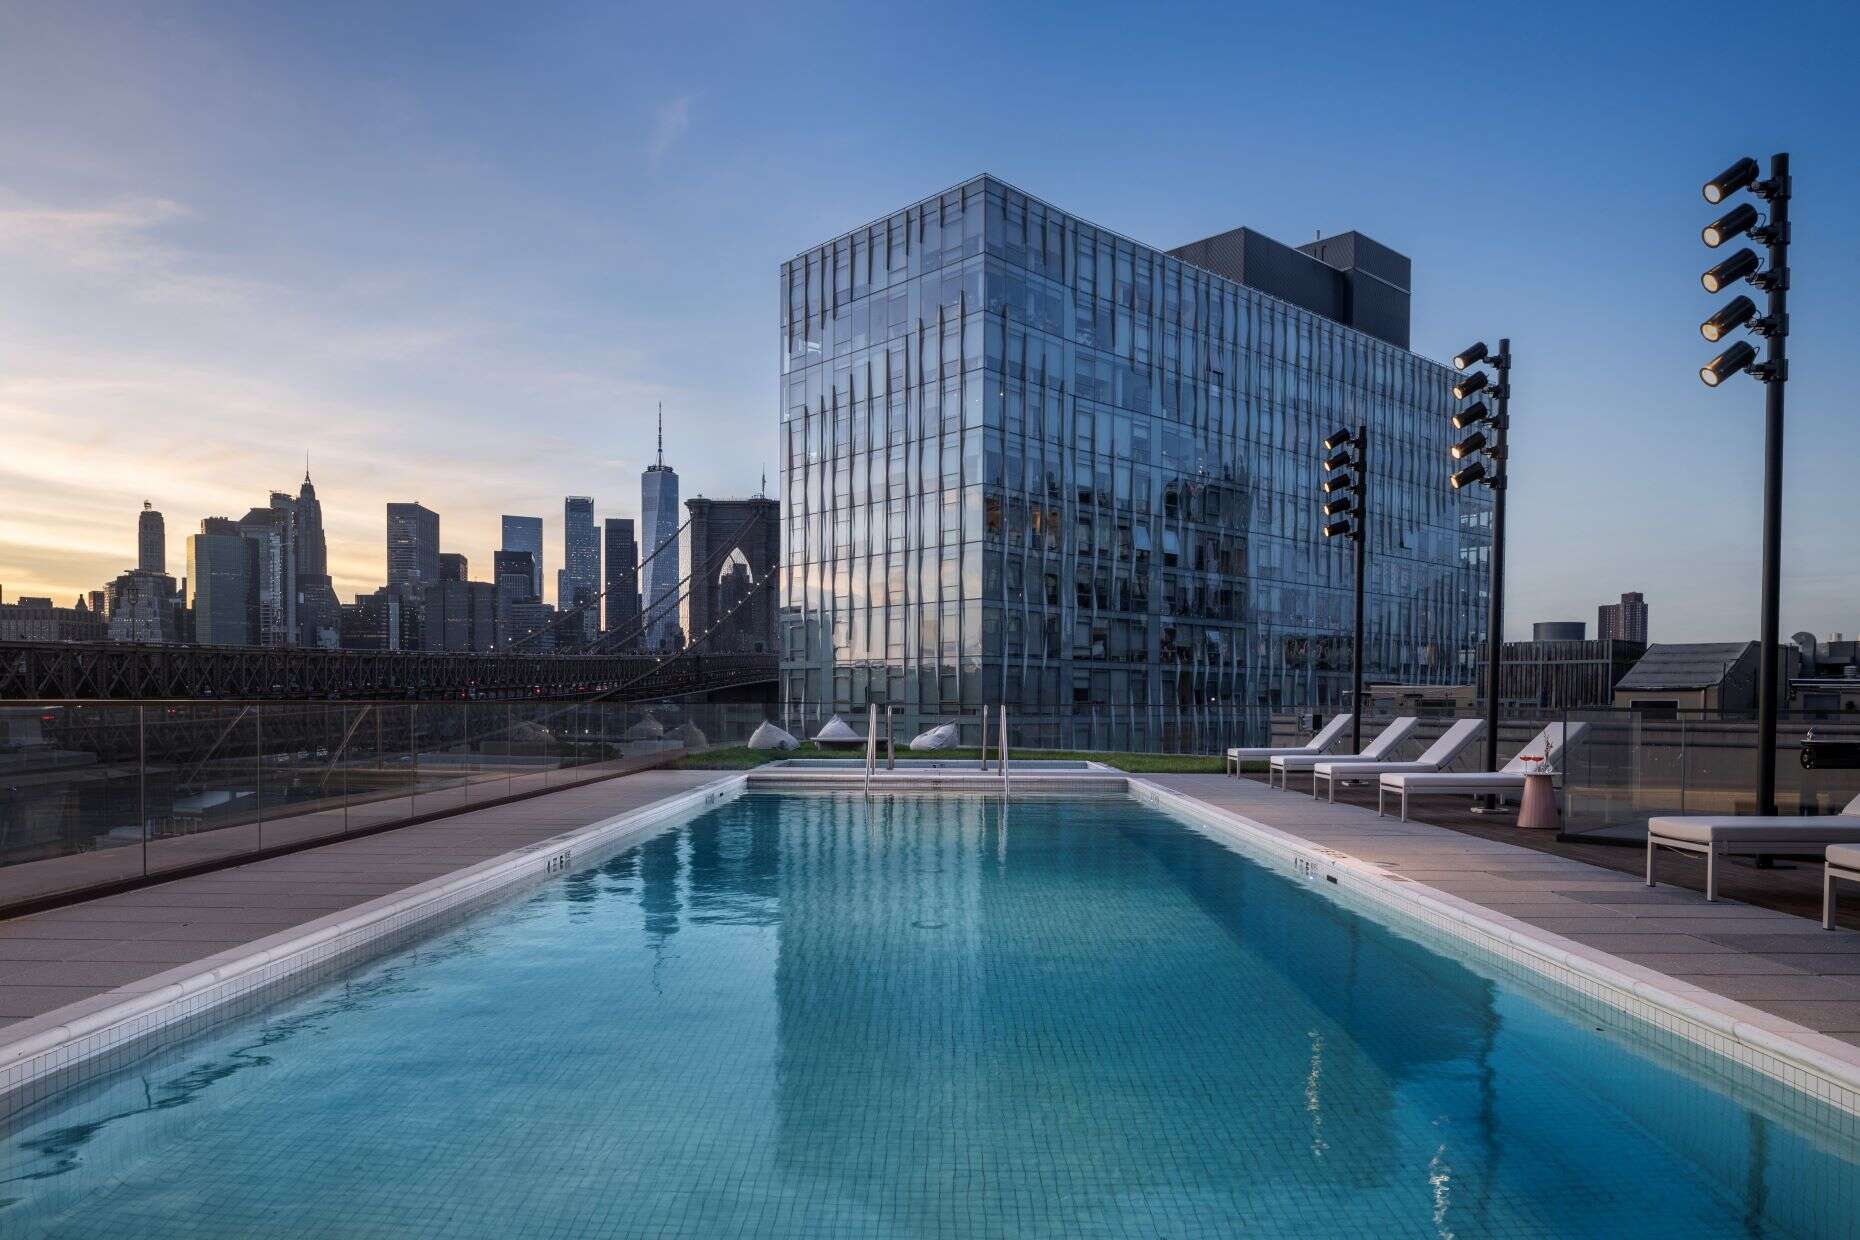 The outdoor swimming pool with views across Brooklyn